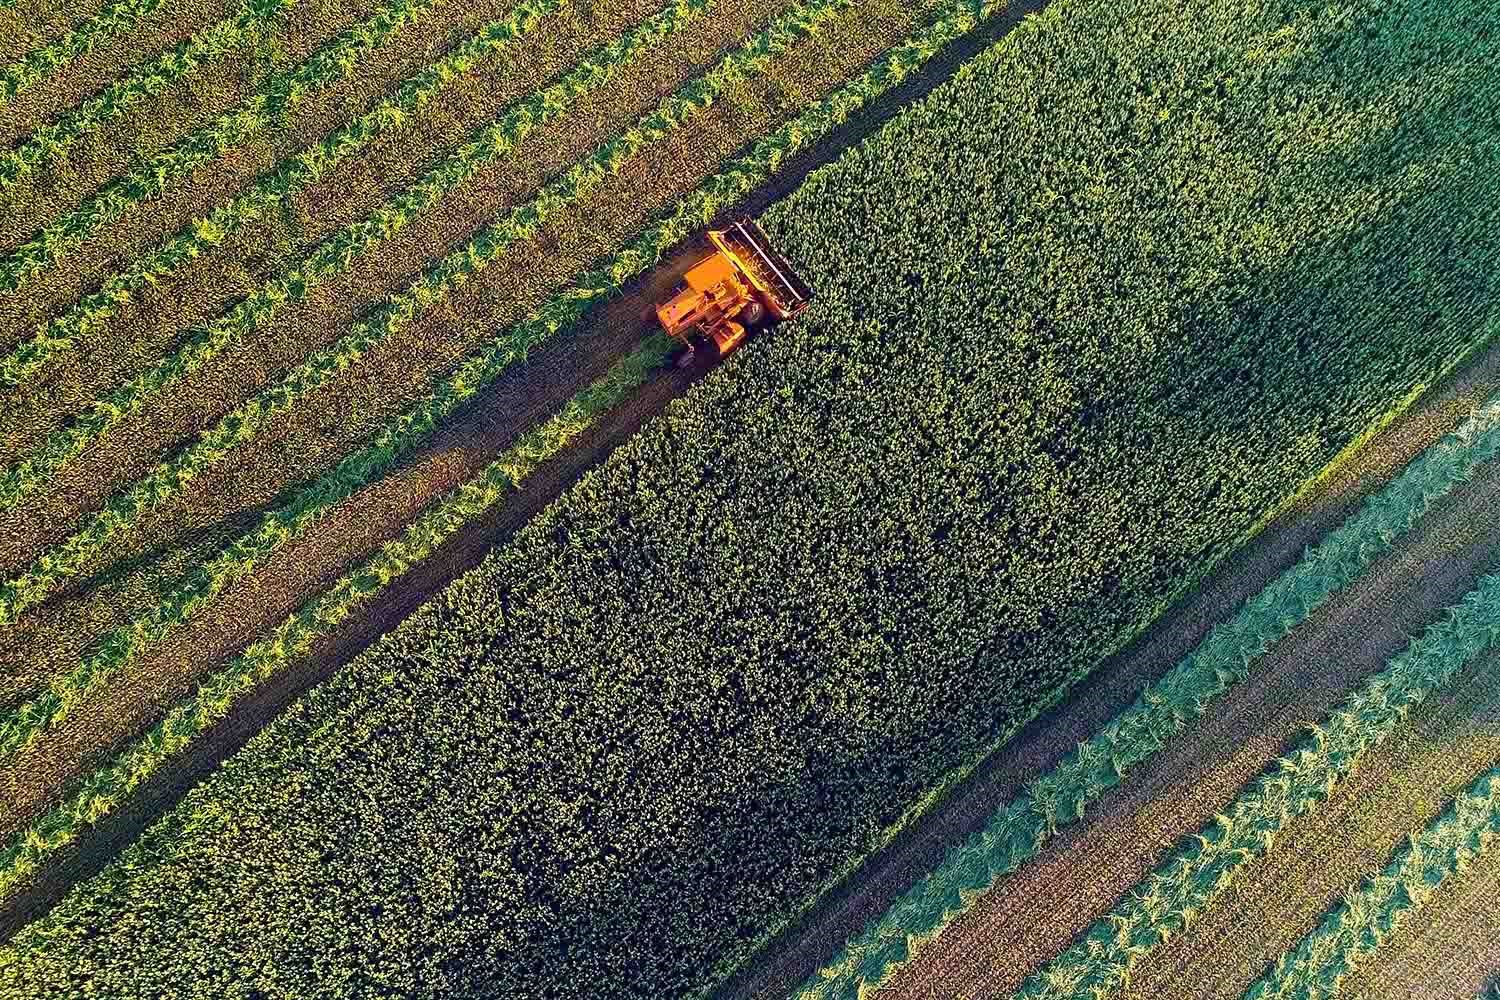 Tractor Harvesting Large Strips of Farm Field in Day Light